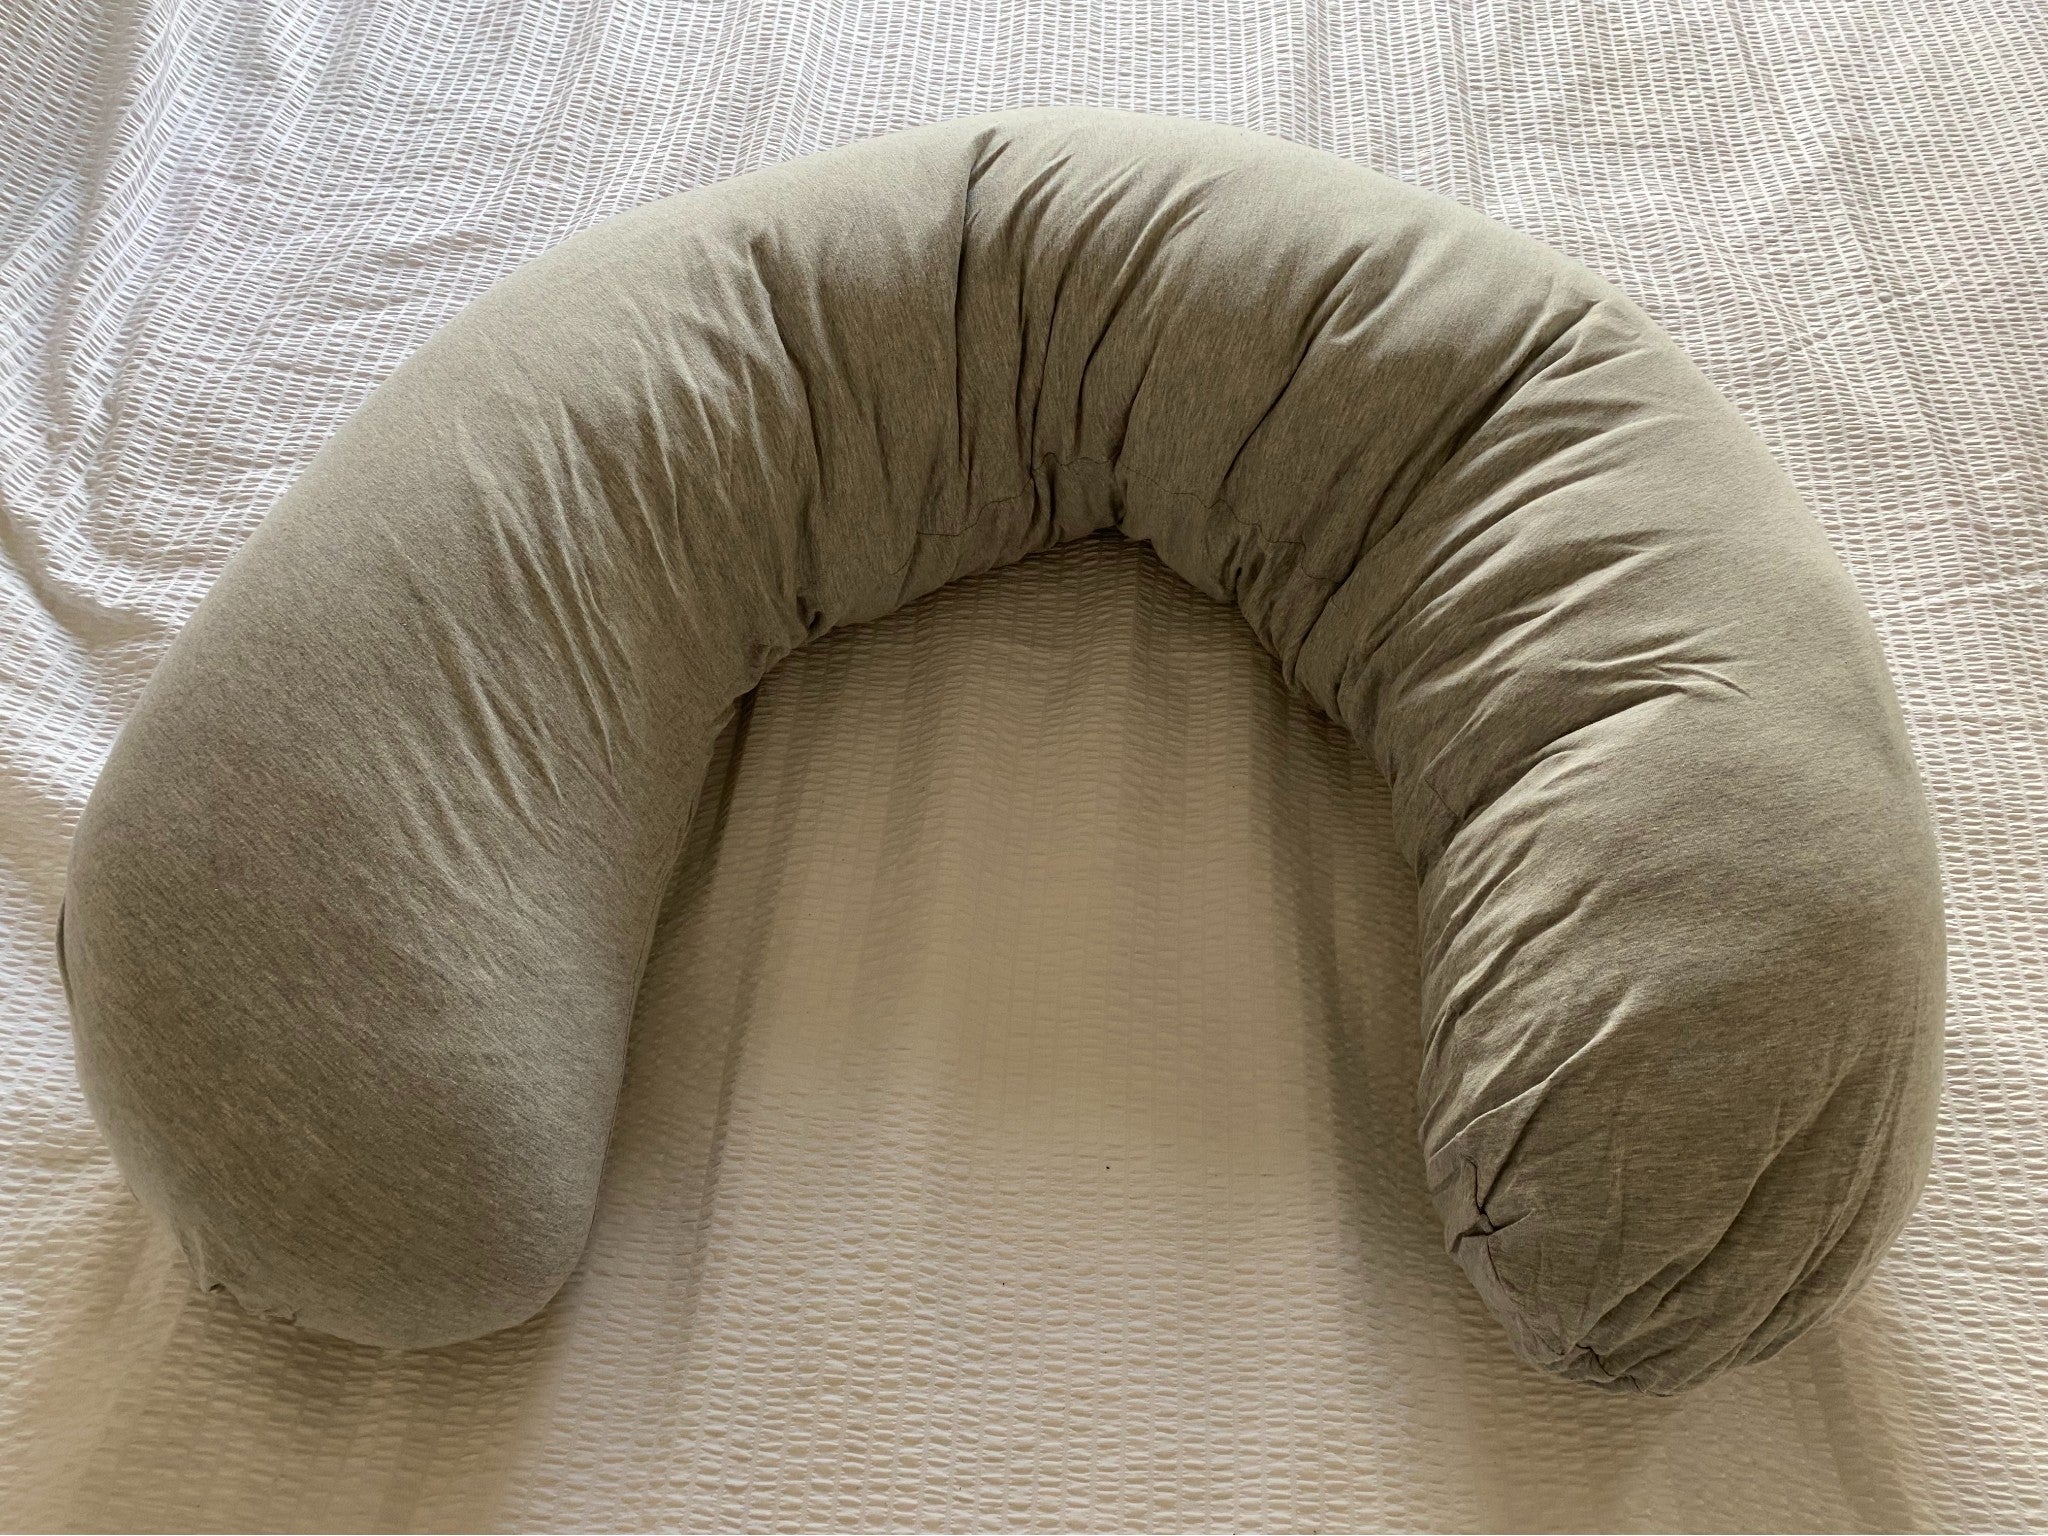 The pillows’s shape is easy to manipulate, and aligns with the spine to ease back pain